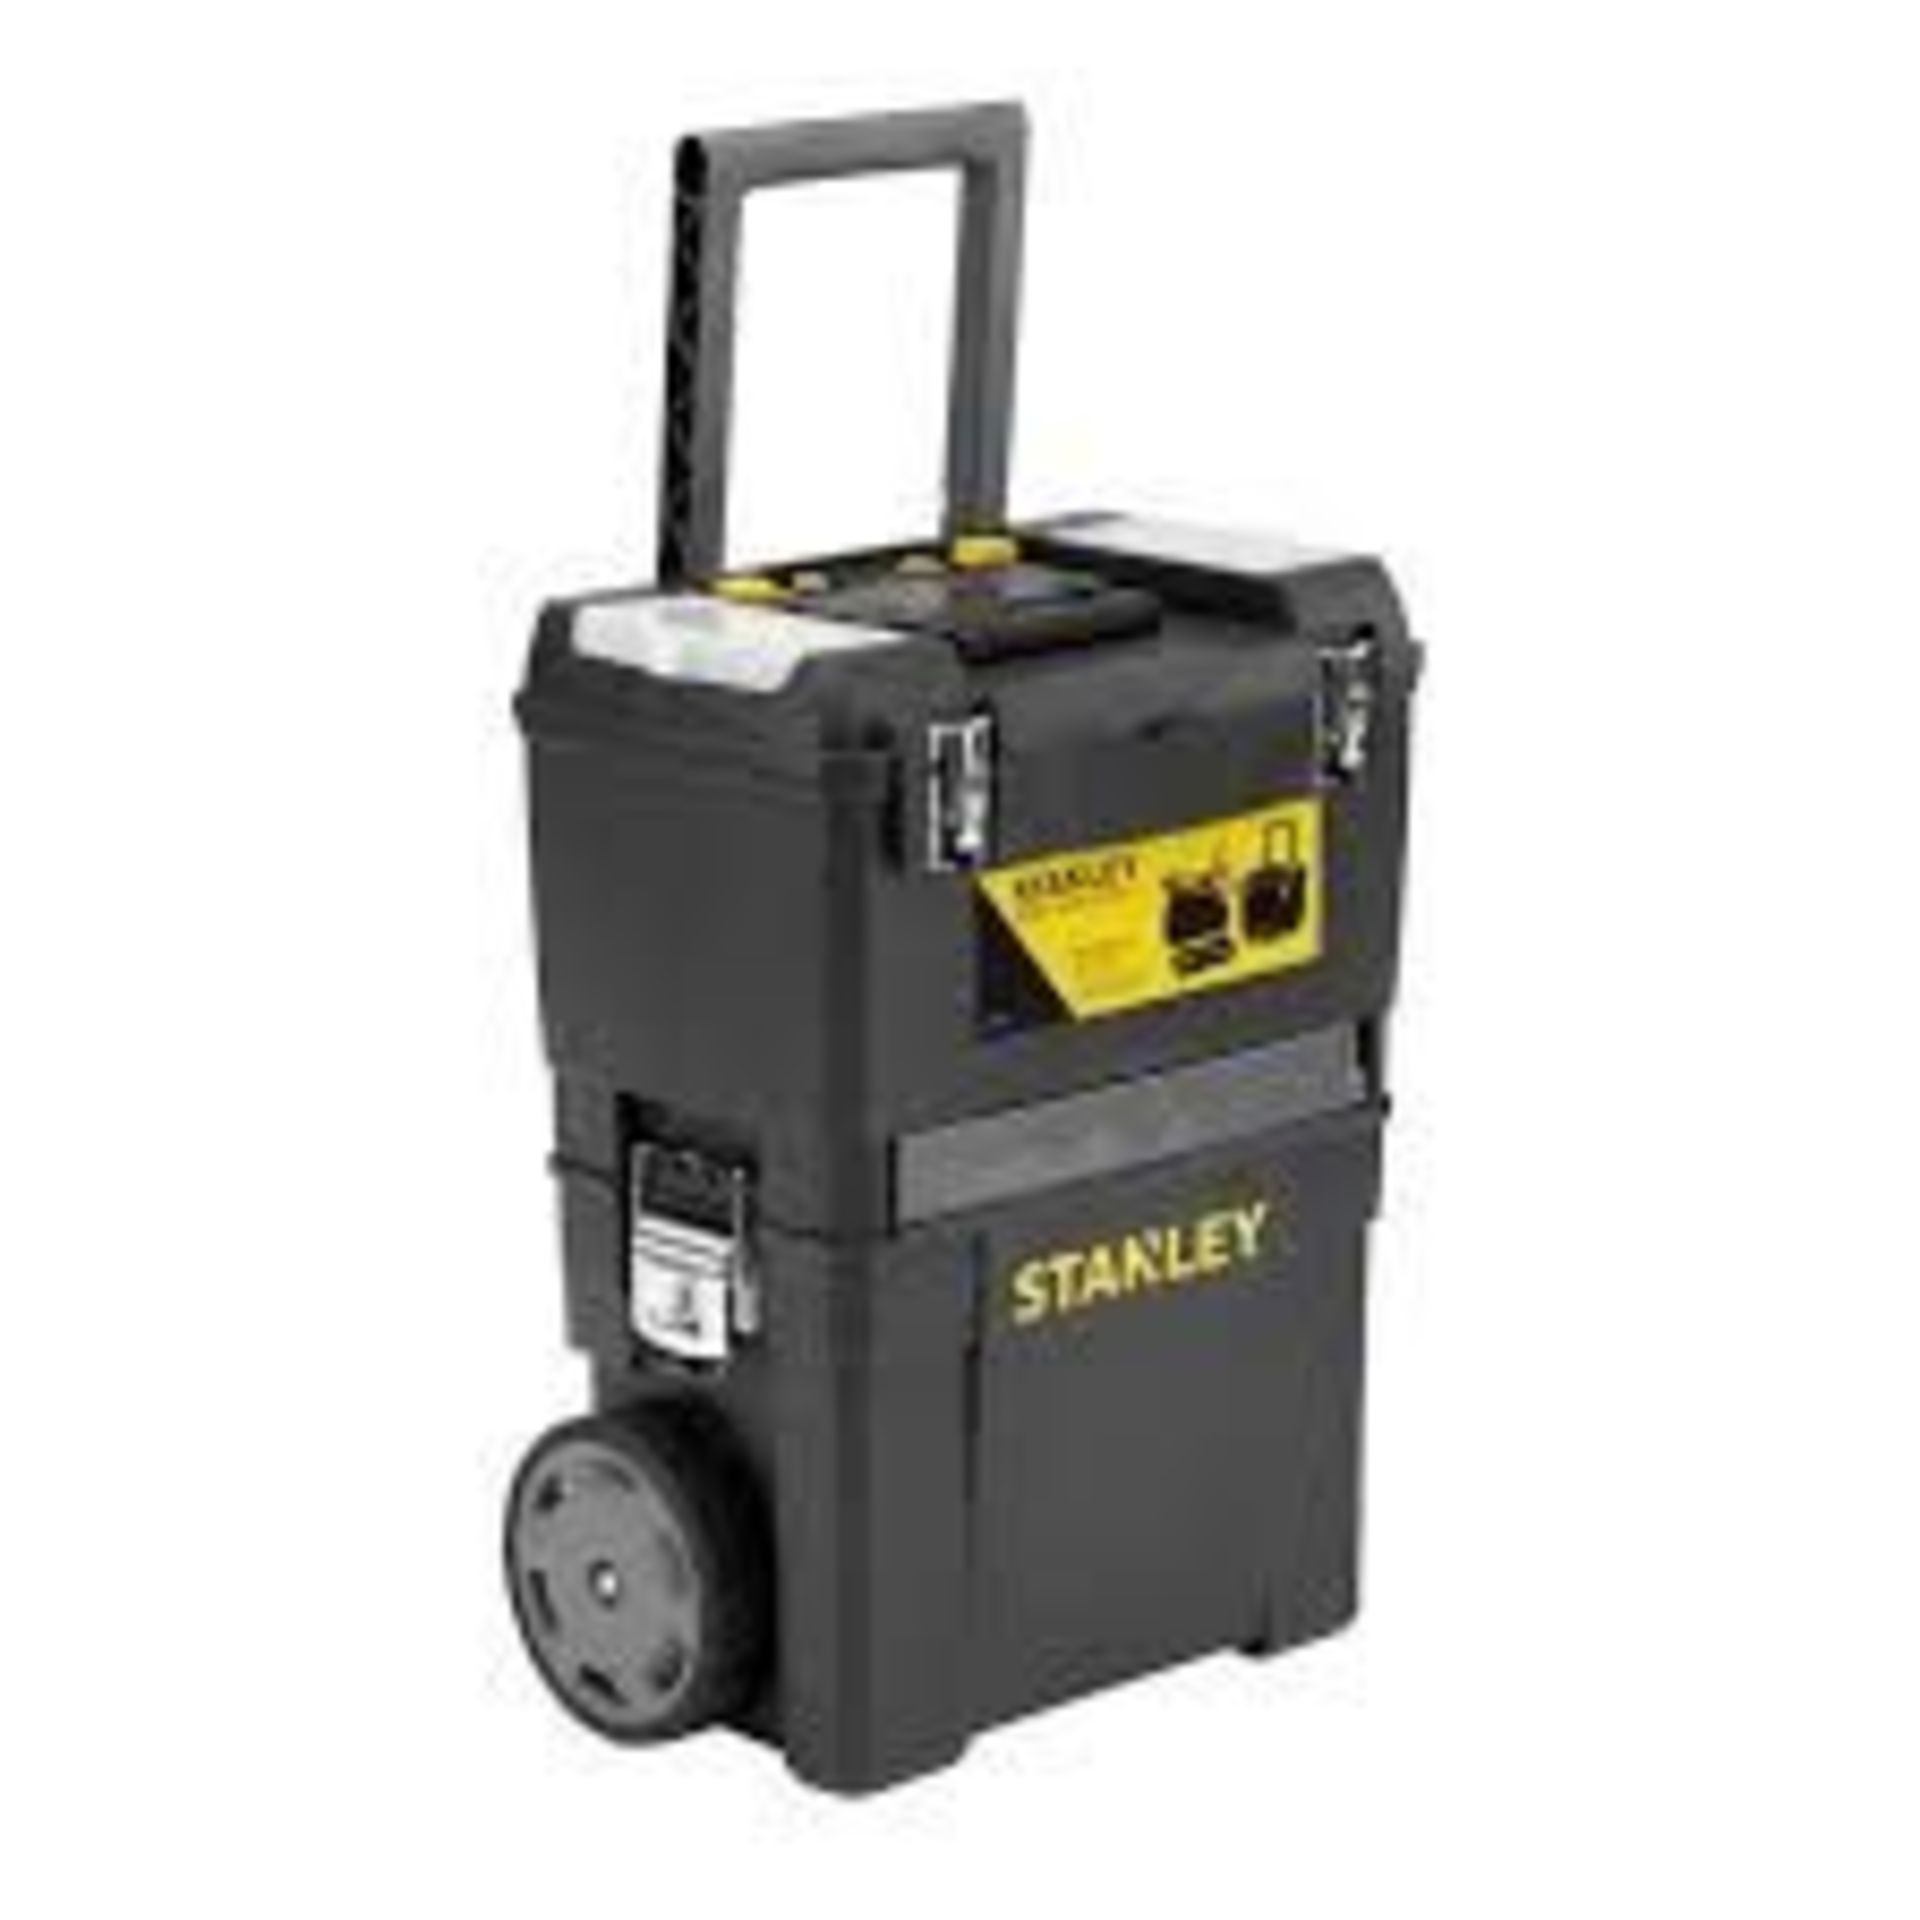 2 x STANLEY Mobile Work Centre Toolbox, 2 Tier Stackable Units,. - R14.14.